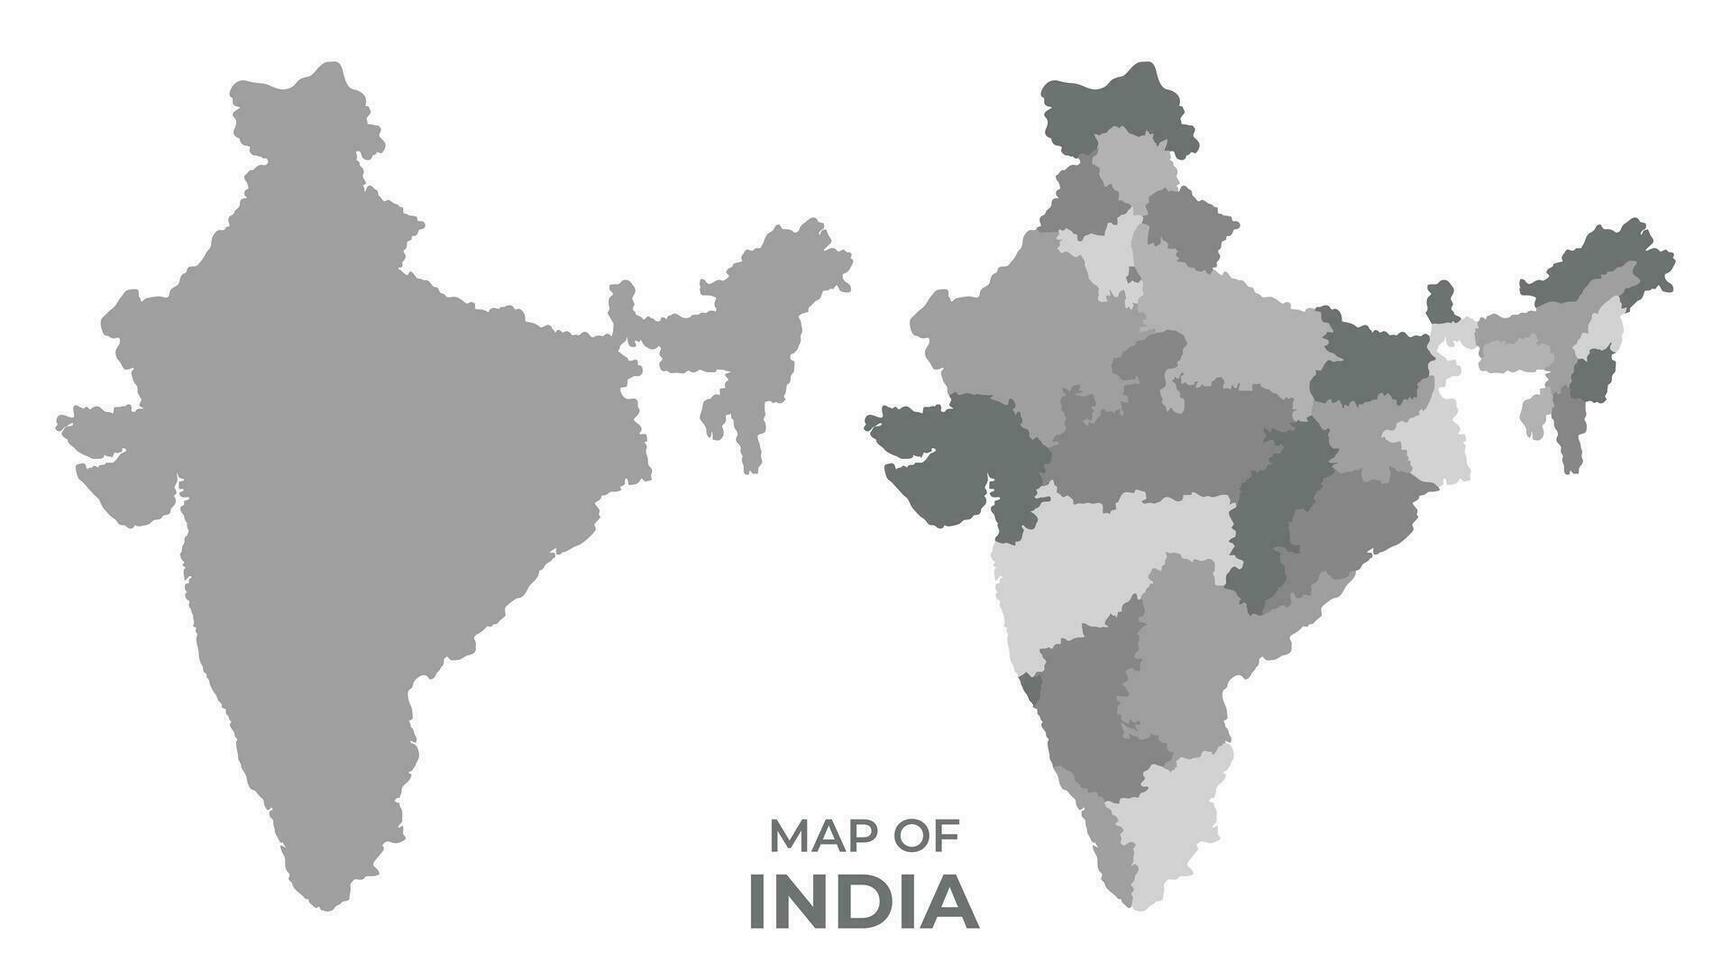 Greyscale vector map of India with regions and simple flat illustration